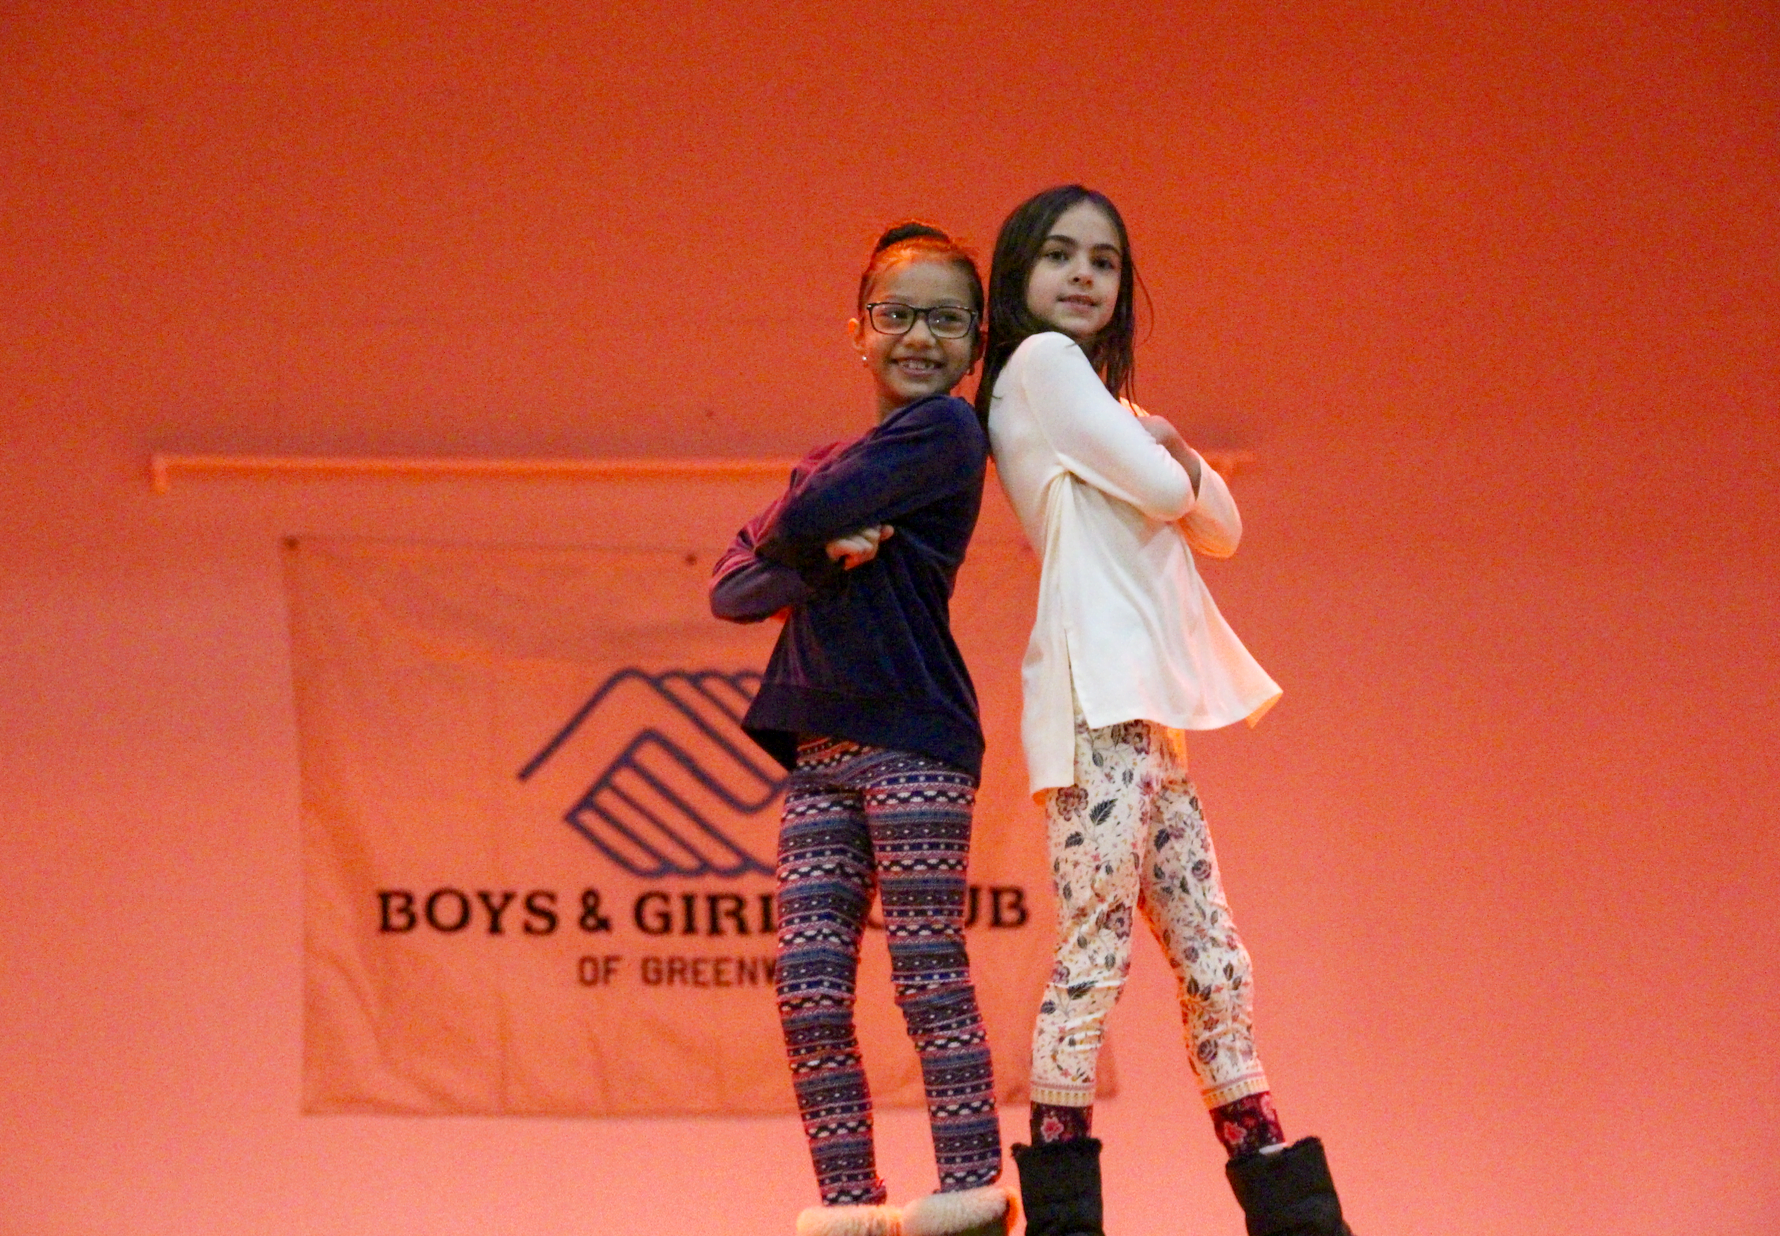 At the Boys & Girls Club of Greenwich, club kids modeled Old Navy outfits for friends and family on Friday Jan 26, 2018 Photo: Leslie Yager